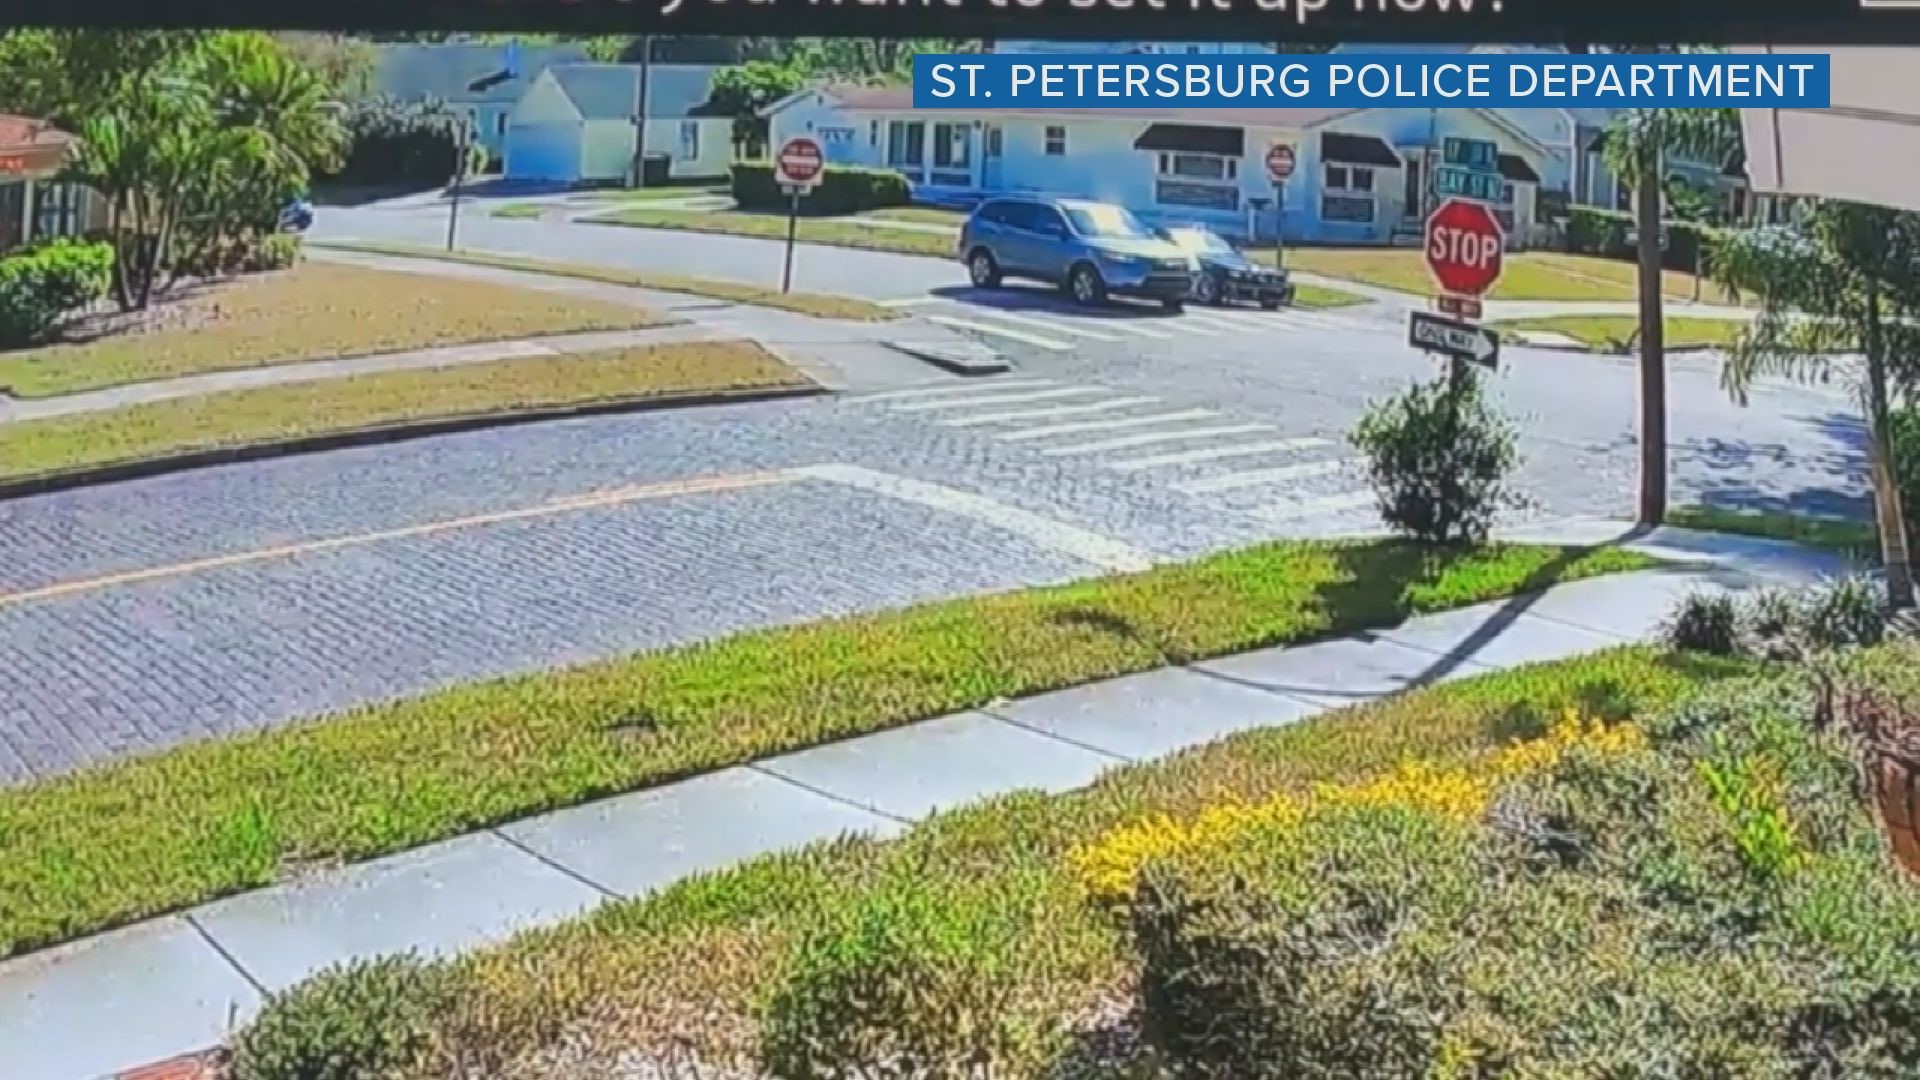 St. Petersburg police released video showing a blue 2012 Hyundai Santa Fe driving away from a BMW; the department says its occupants fired upon the people inside the BMW.